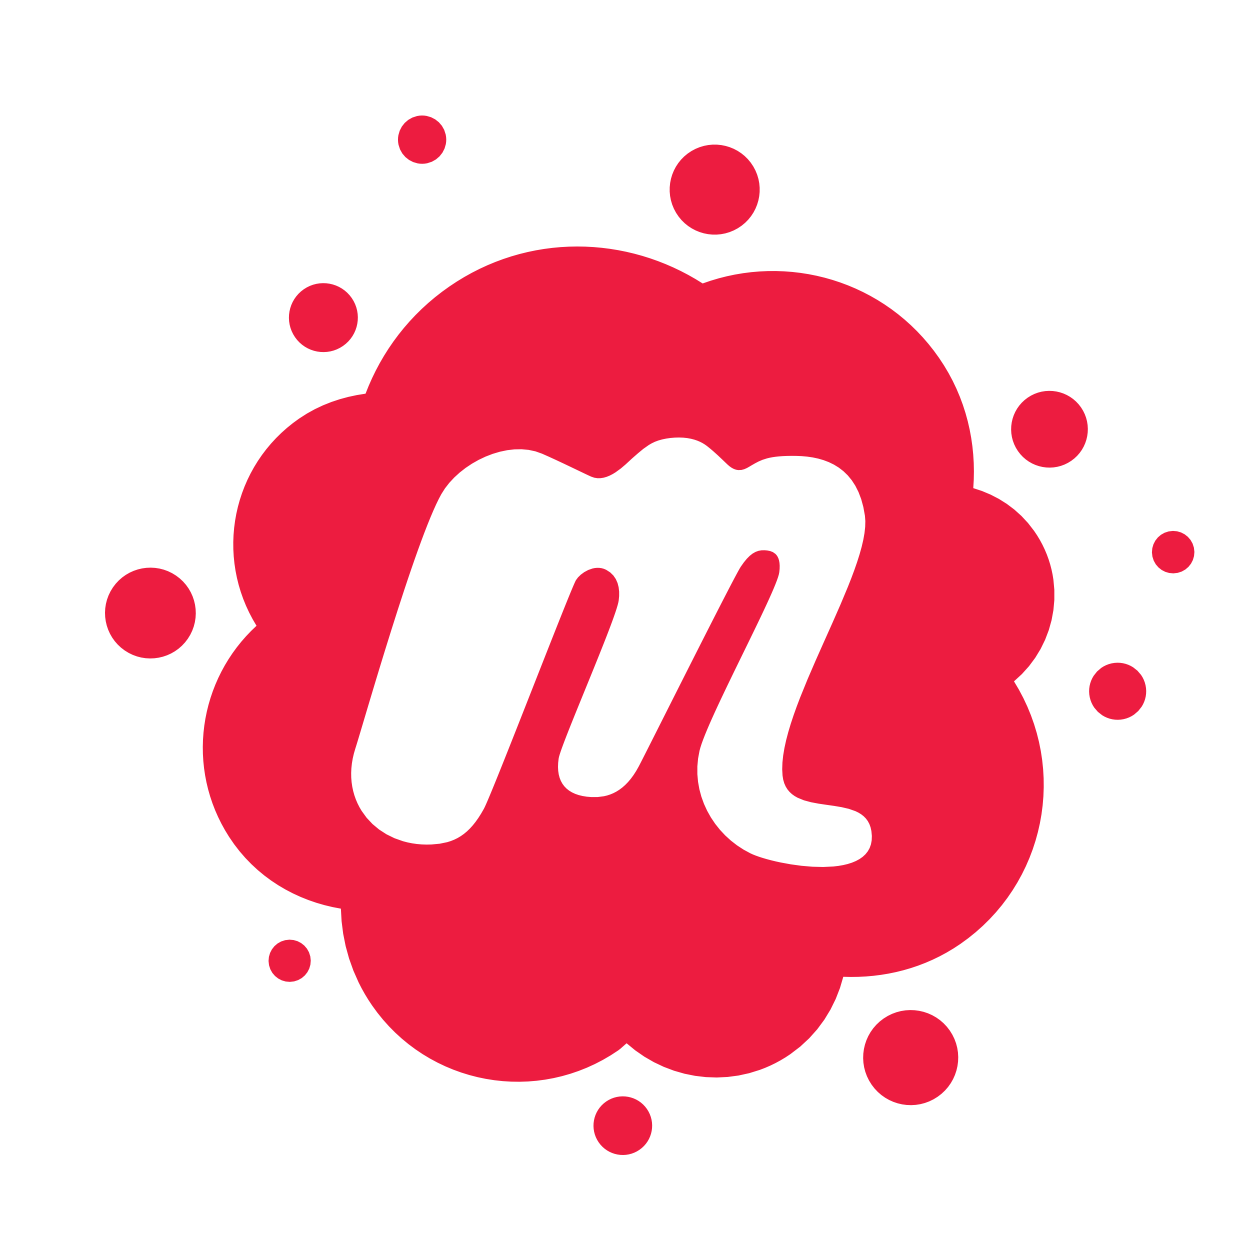 Meetup Logo - We are what we do